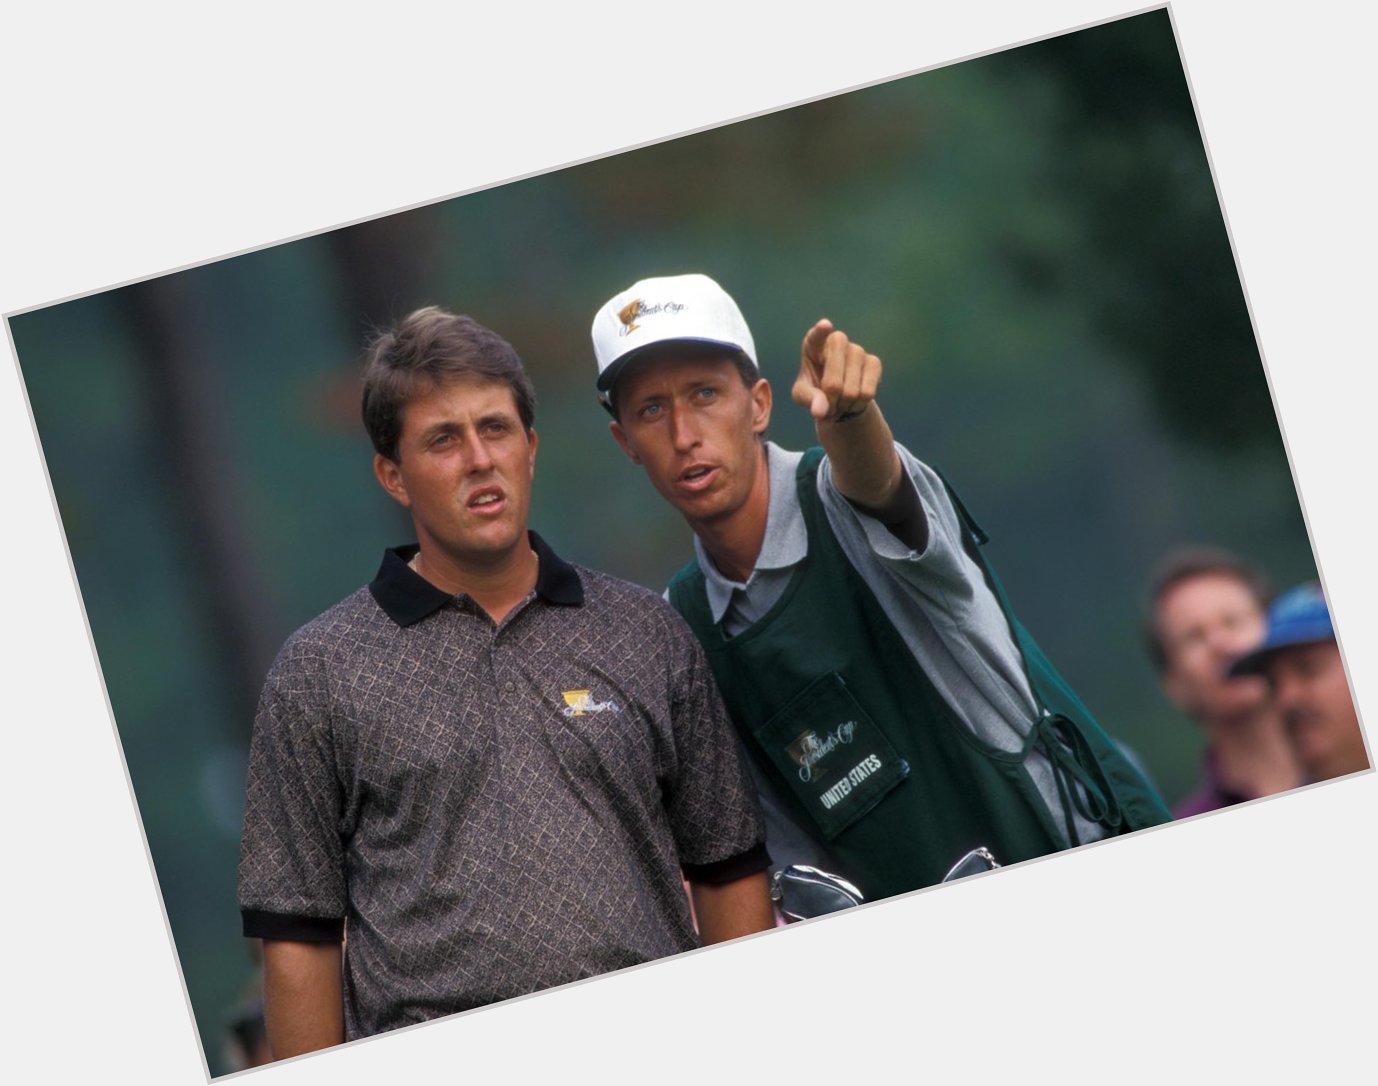 Happy Birthday Phil Mickelson, the only player that has been with us since 1994. 